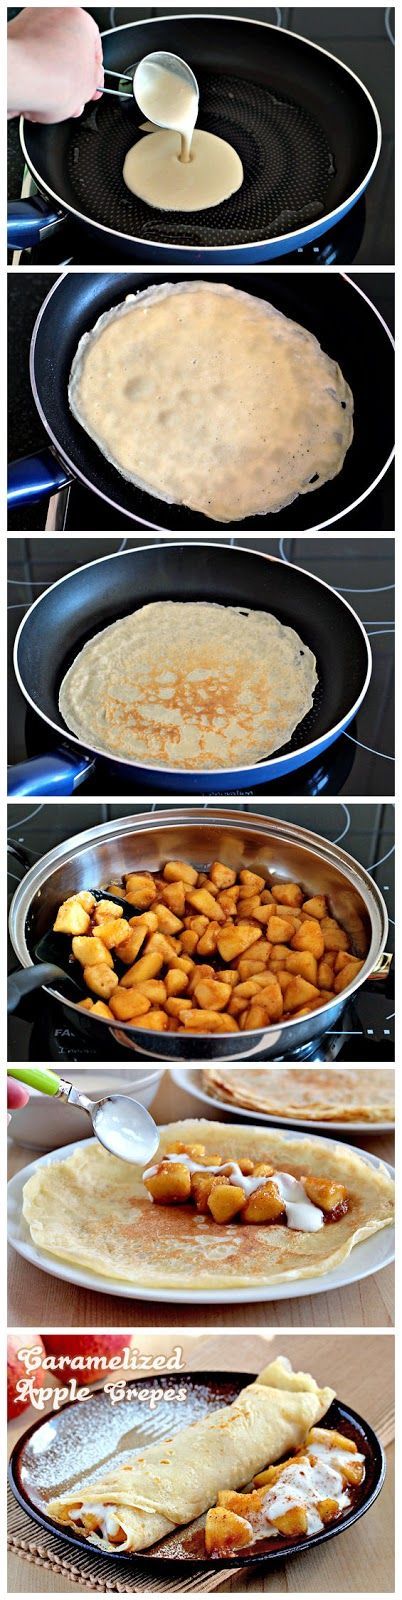 Caramelized Apple Crepes – yum.  Could also make caramelized banana crepes.  All can be made in advance.